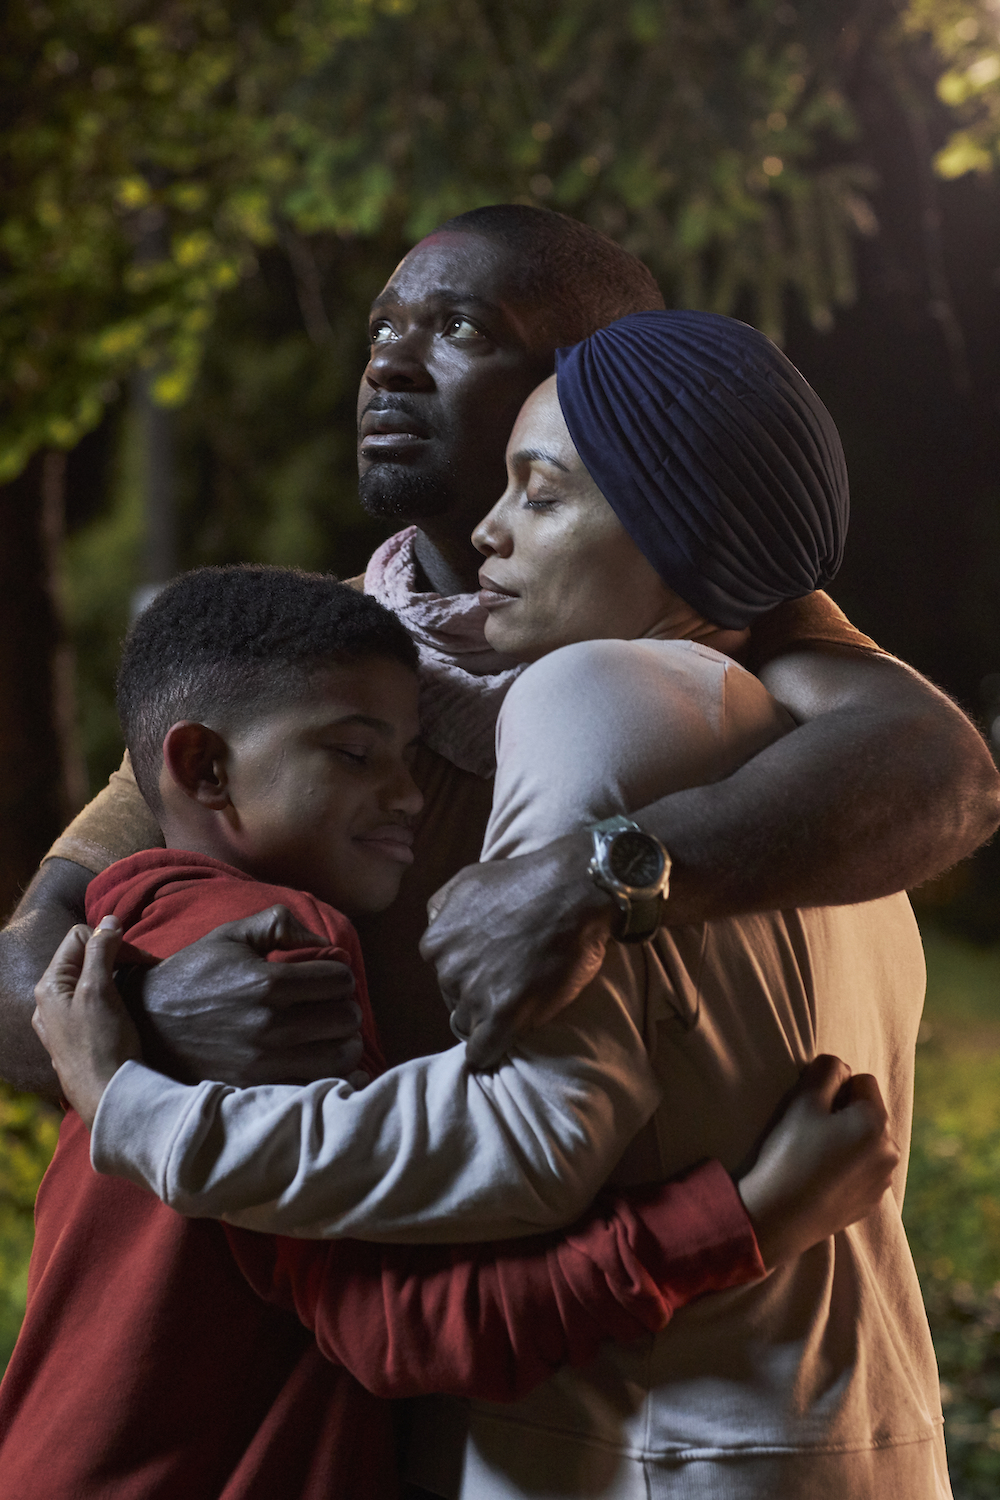 DAVID OYELOWO’S 'THE WATER MAN' SELECTED TO OPEN 29TH PAN AFRICAN FILM FESTIVAL